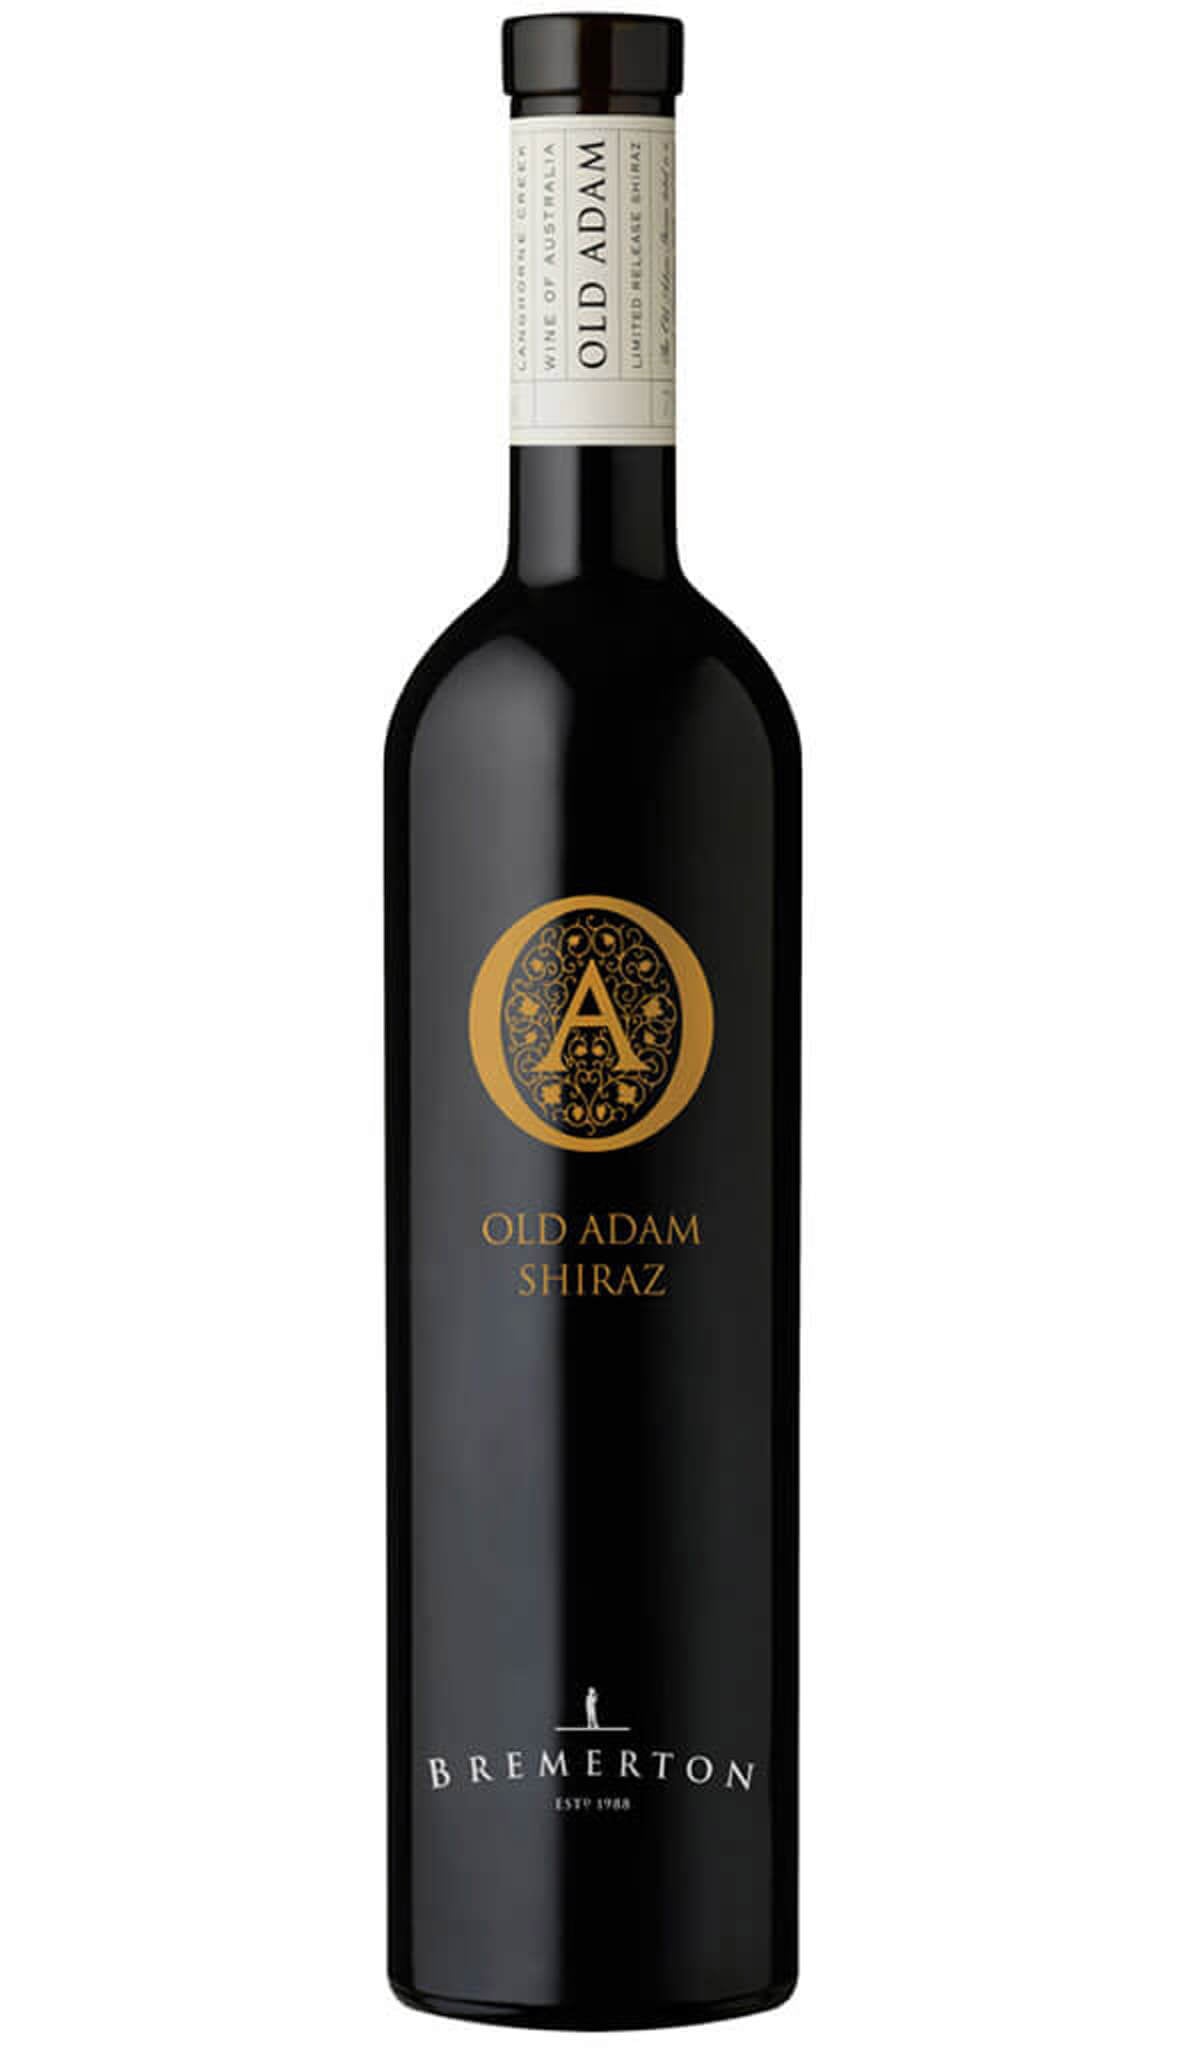 Find out more or buy Bremerton Old Adam Shiraz 2021 (Langhorne Creek) online at Wine Sellers Direct - Australia’s independent liquor specialists.